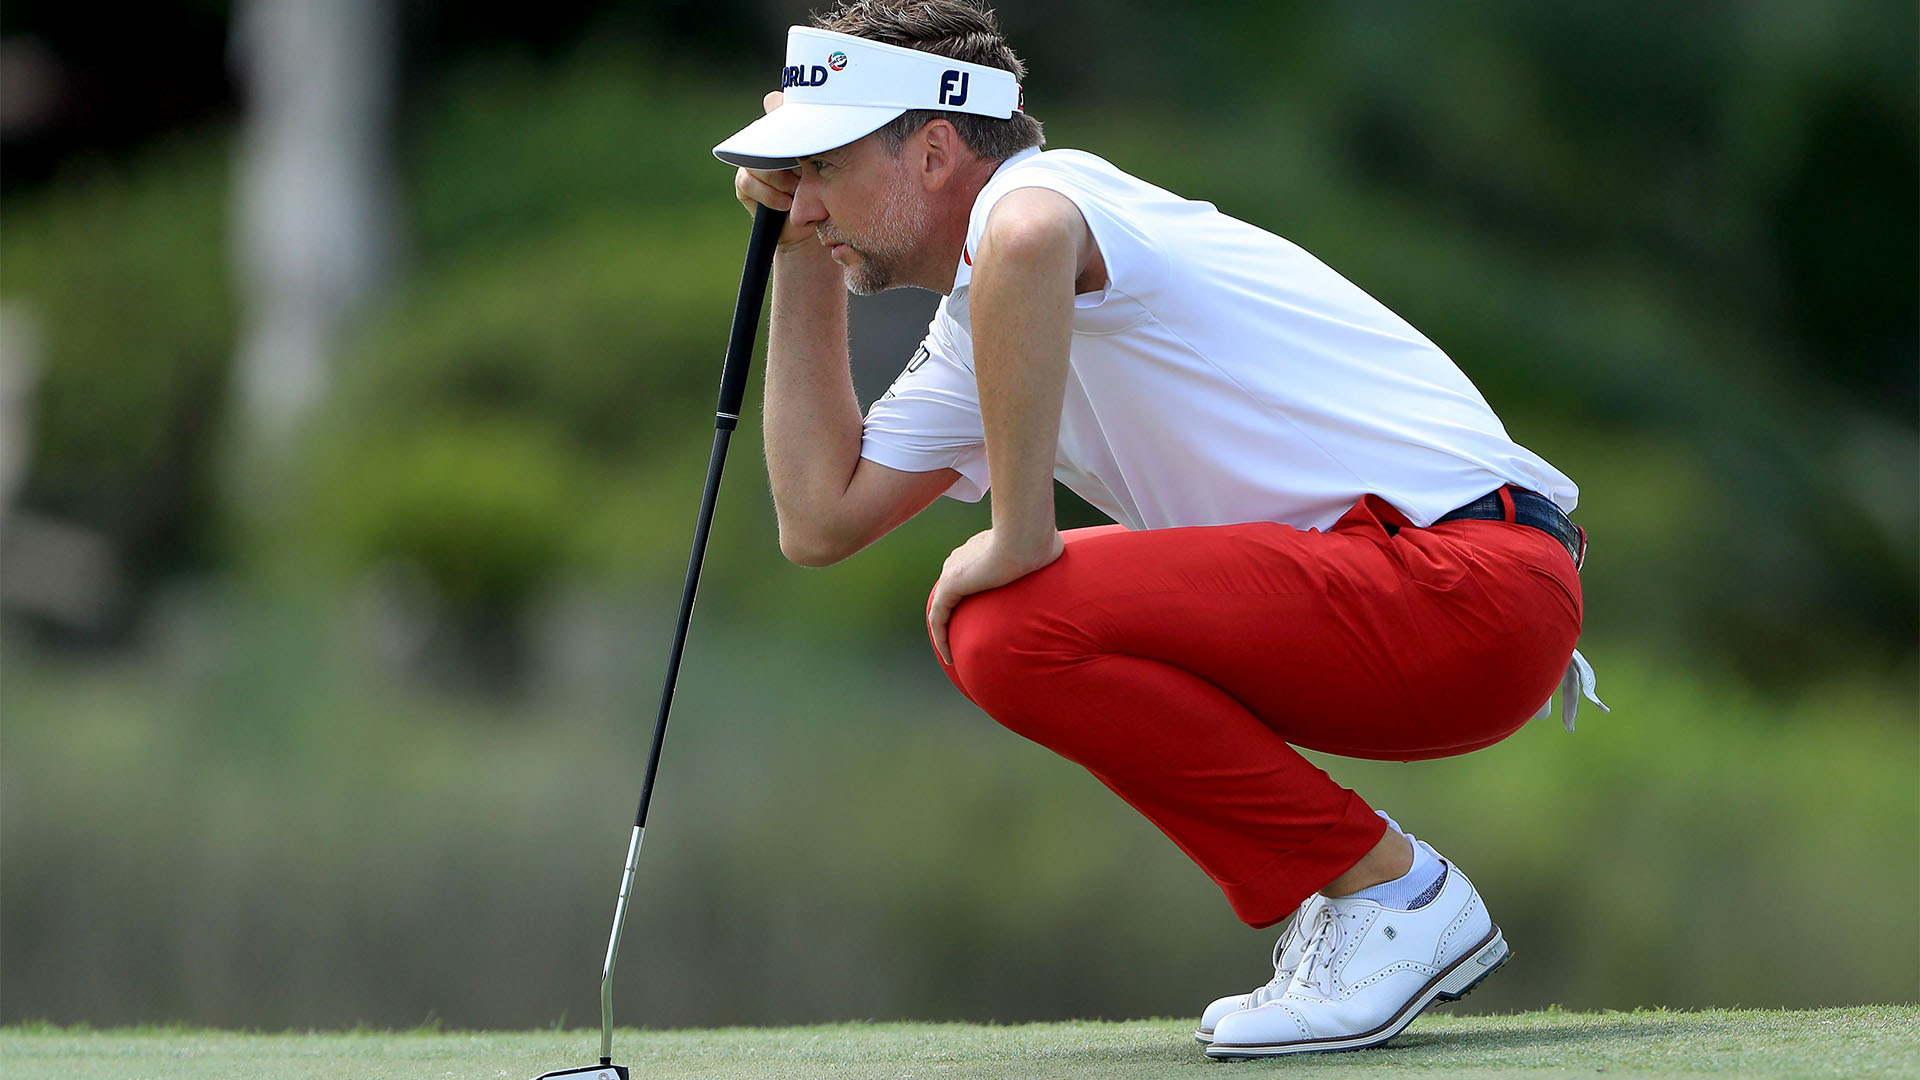 After showcasing ‘bizarre sensation’ of COVID-19 testing, Ian Poulter (64) co-leads